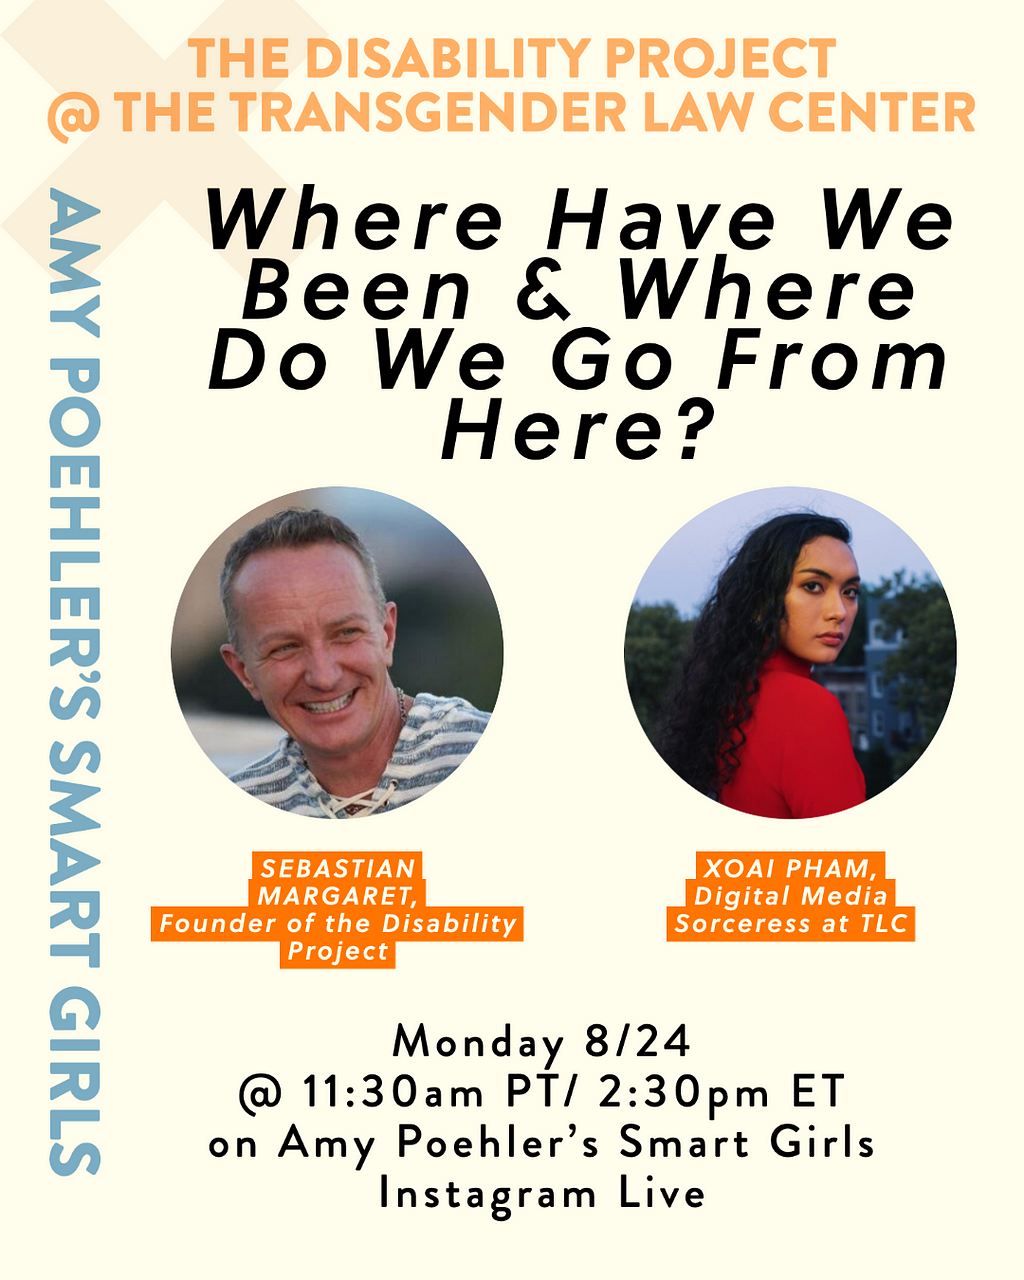 Graphic for “Where Have We Been and Where Do We Go From Here?” an IG live conversation with Sebastian Margaret and Xoai Pham